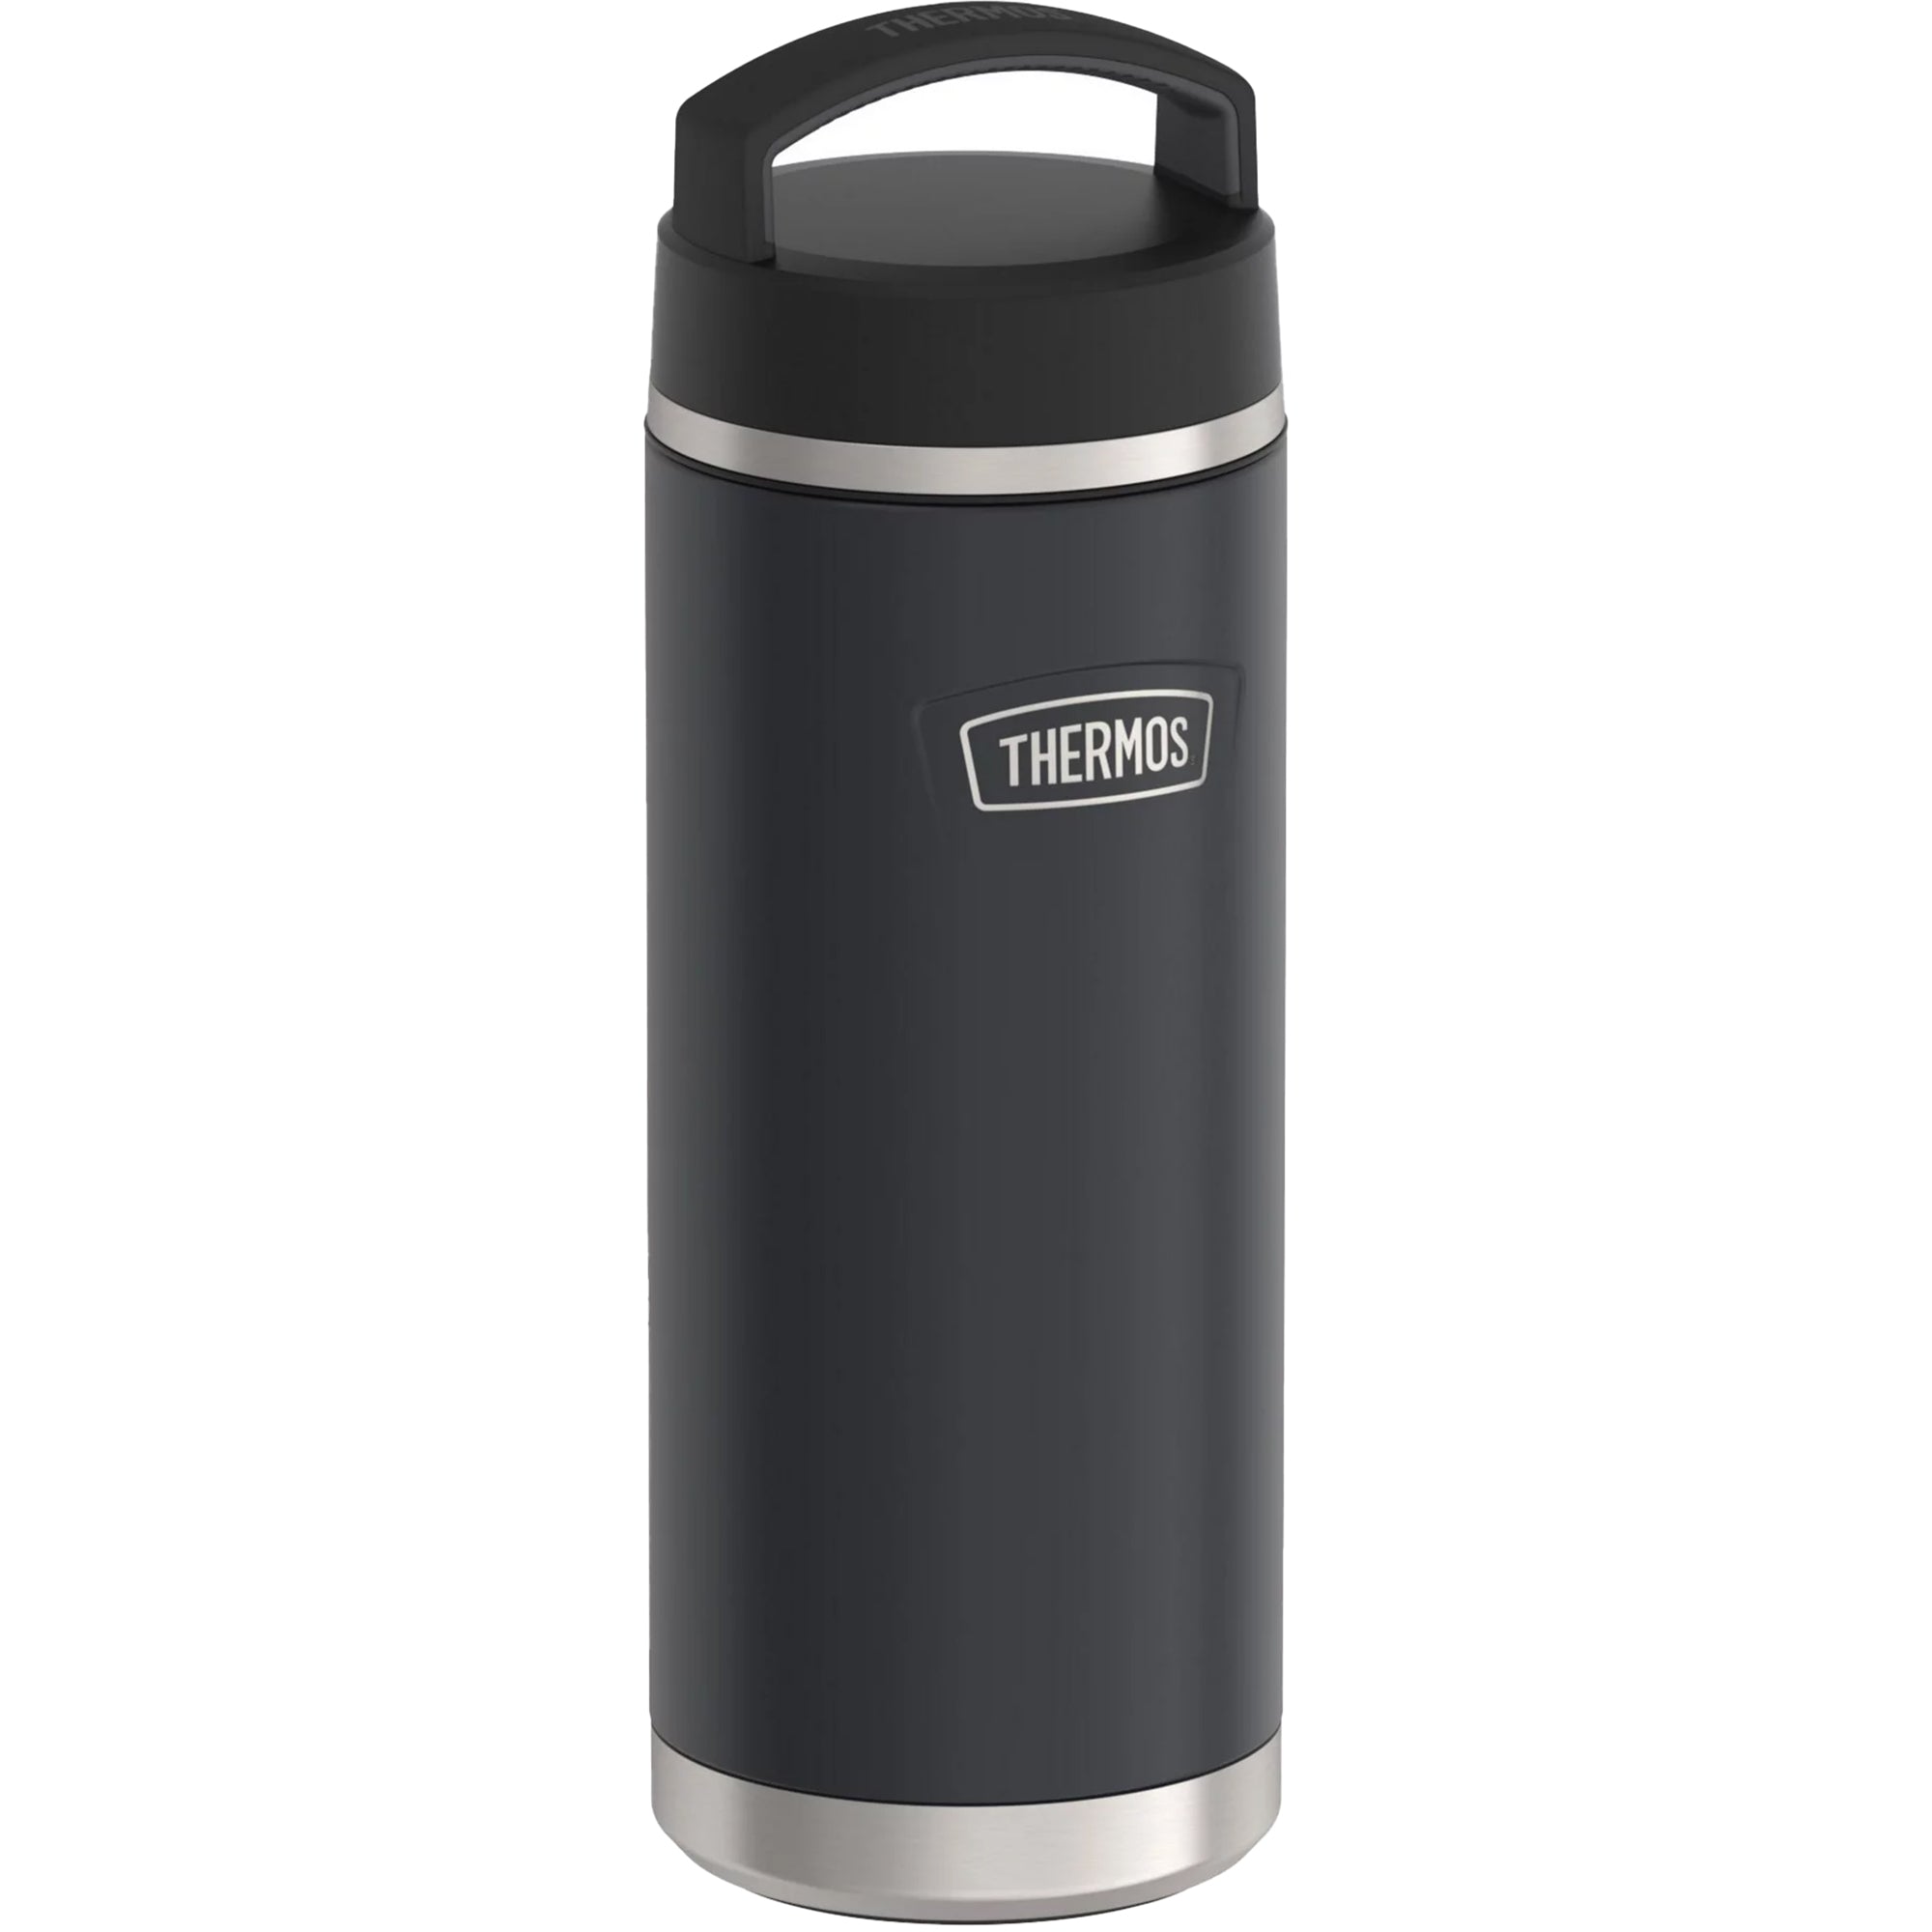 Thermos 32 oz. Icon Stainless Steel Dual Temperature Beverage Bottle Thermos